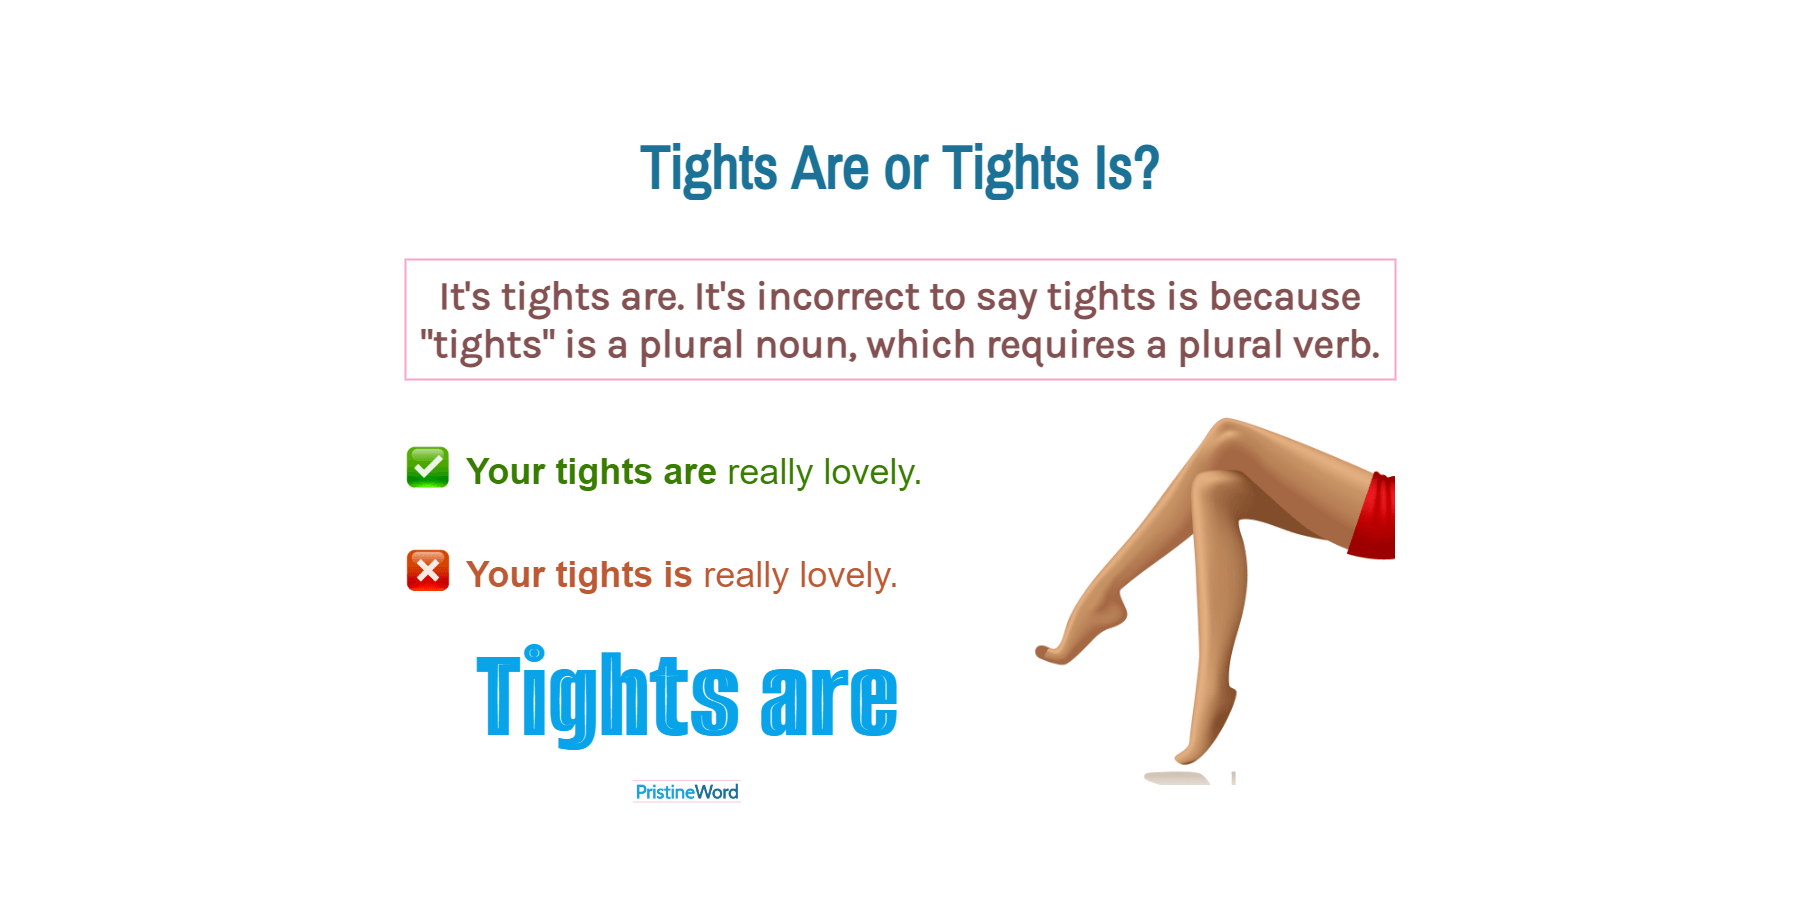 Tights Are Or Tights Is. Which Is Correct?